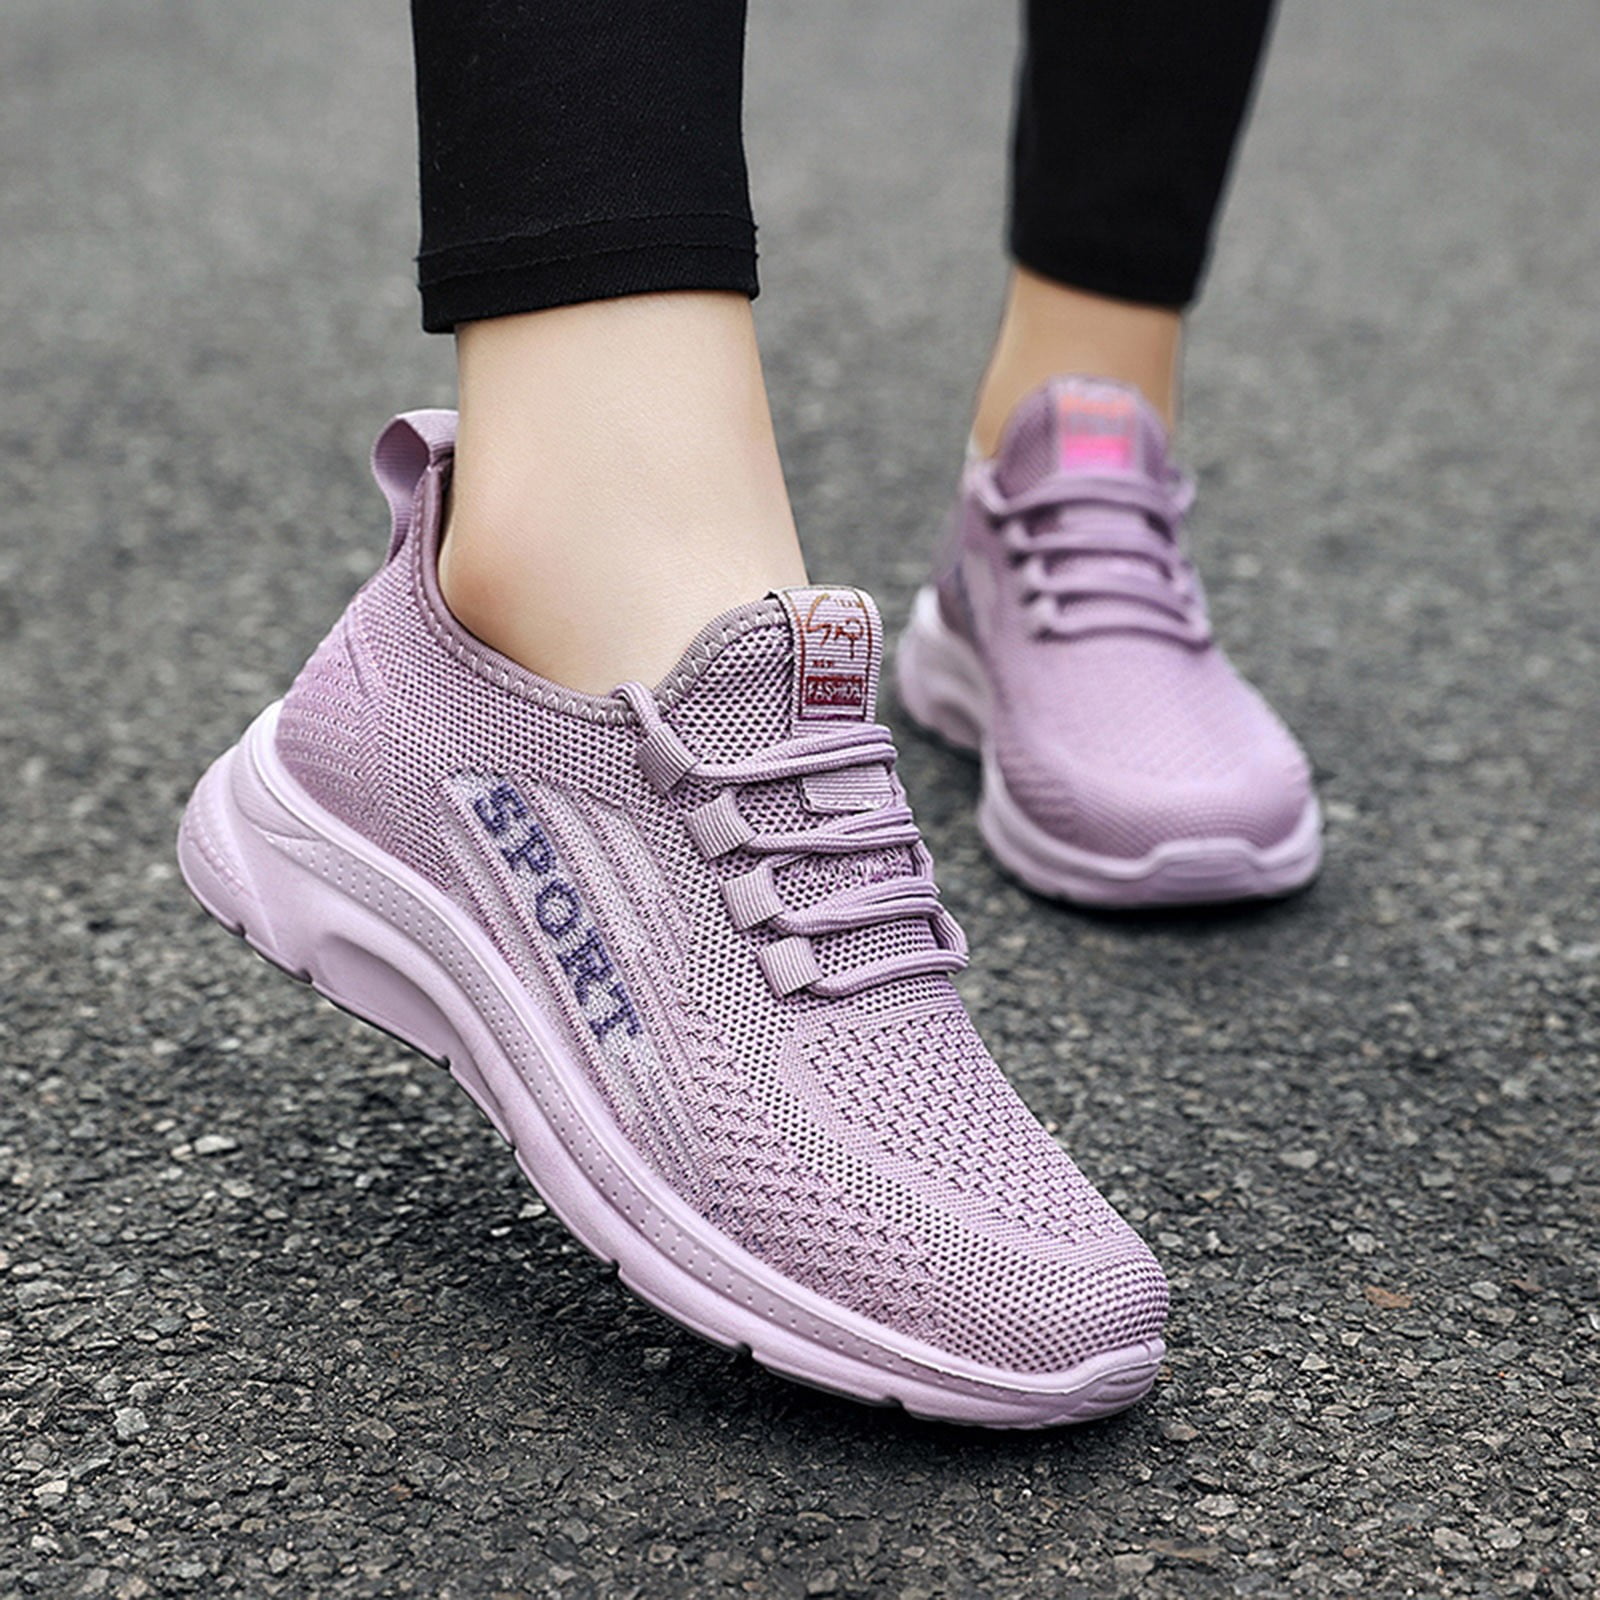 Quealent Running Shoes Slip On Breathe Mesh Walking Shoes Women Fashion  Sneakers Comfort Wedge Platform Loafers,Purple 8 